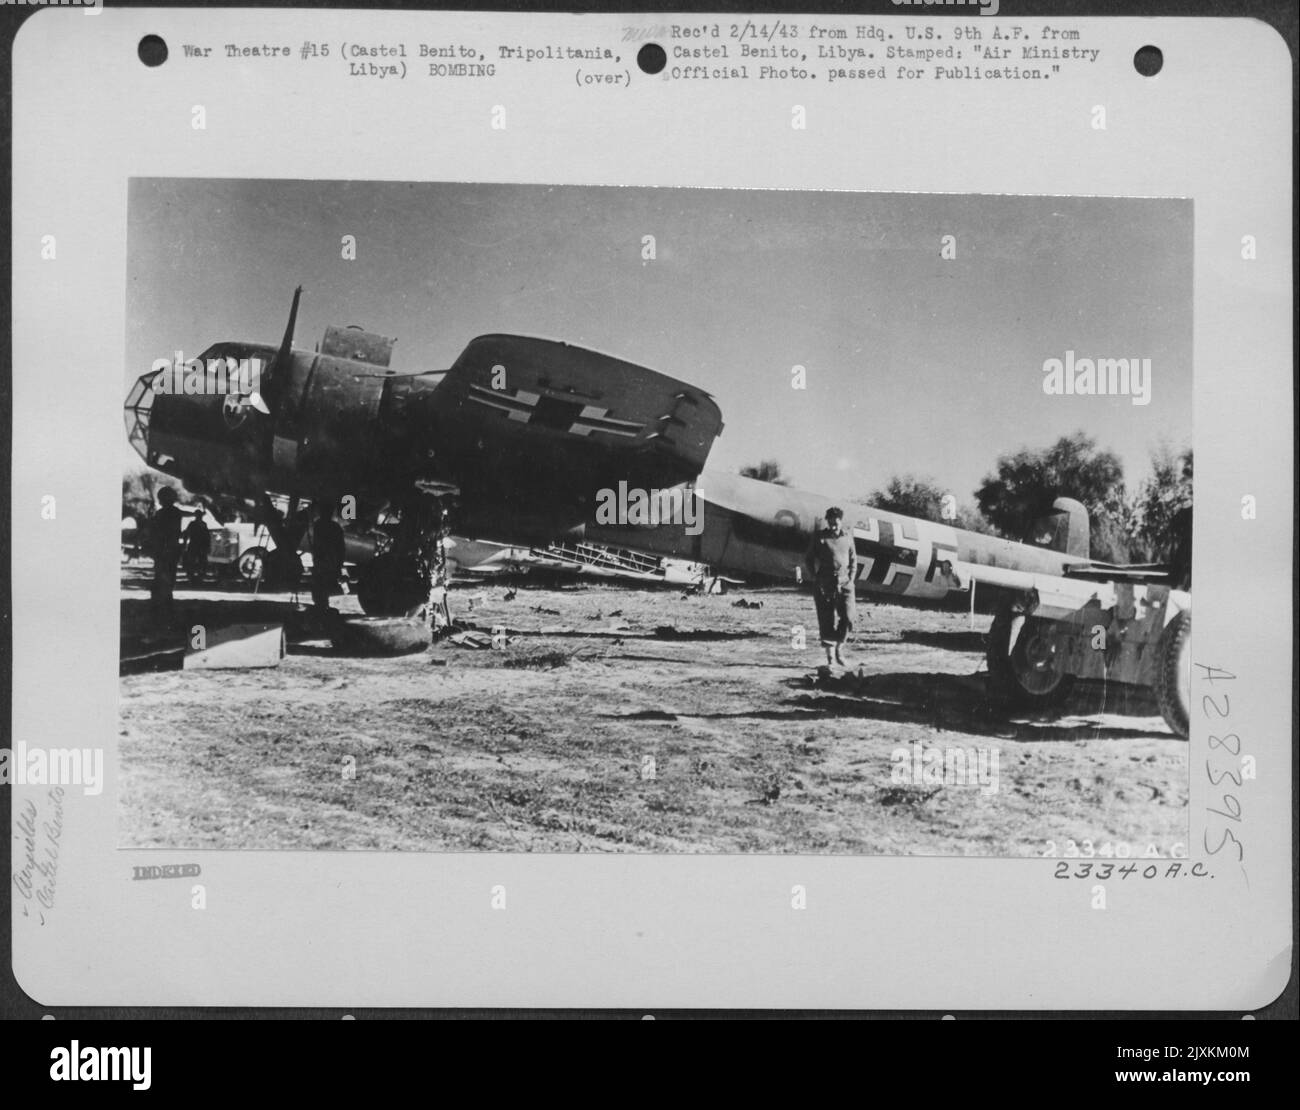 A Dornier 217, practically undamaged, found at Castel Benito, Tripolitania, Libya, when the Allied Air Force occupied the airfield. 26 January 1943. Stock Photo